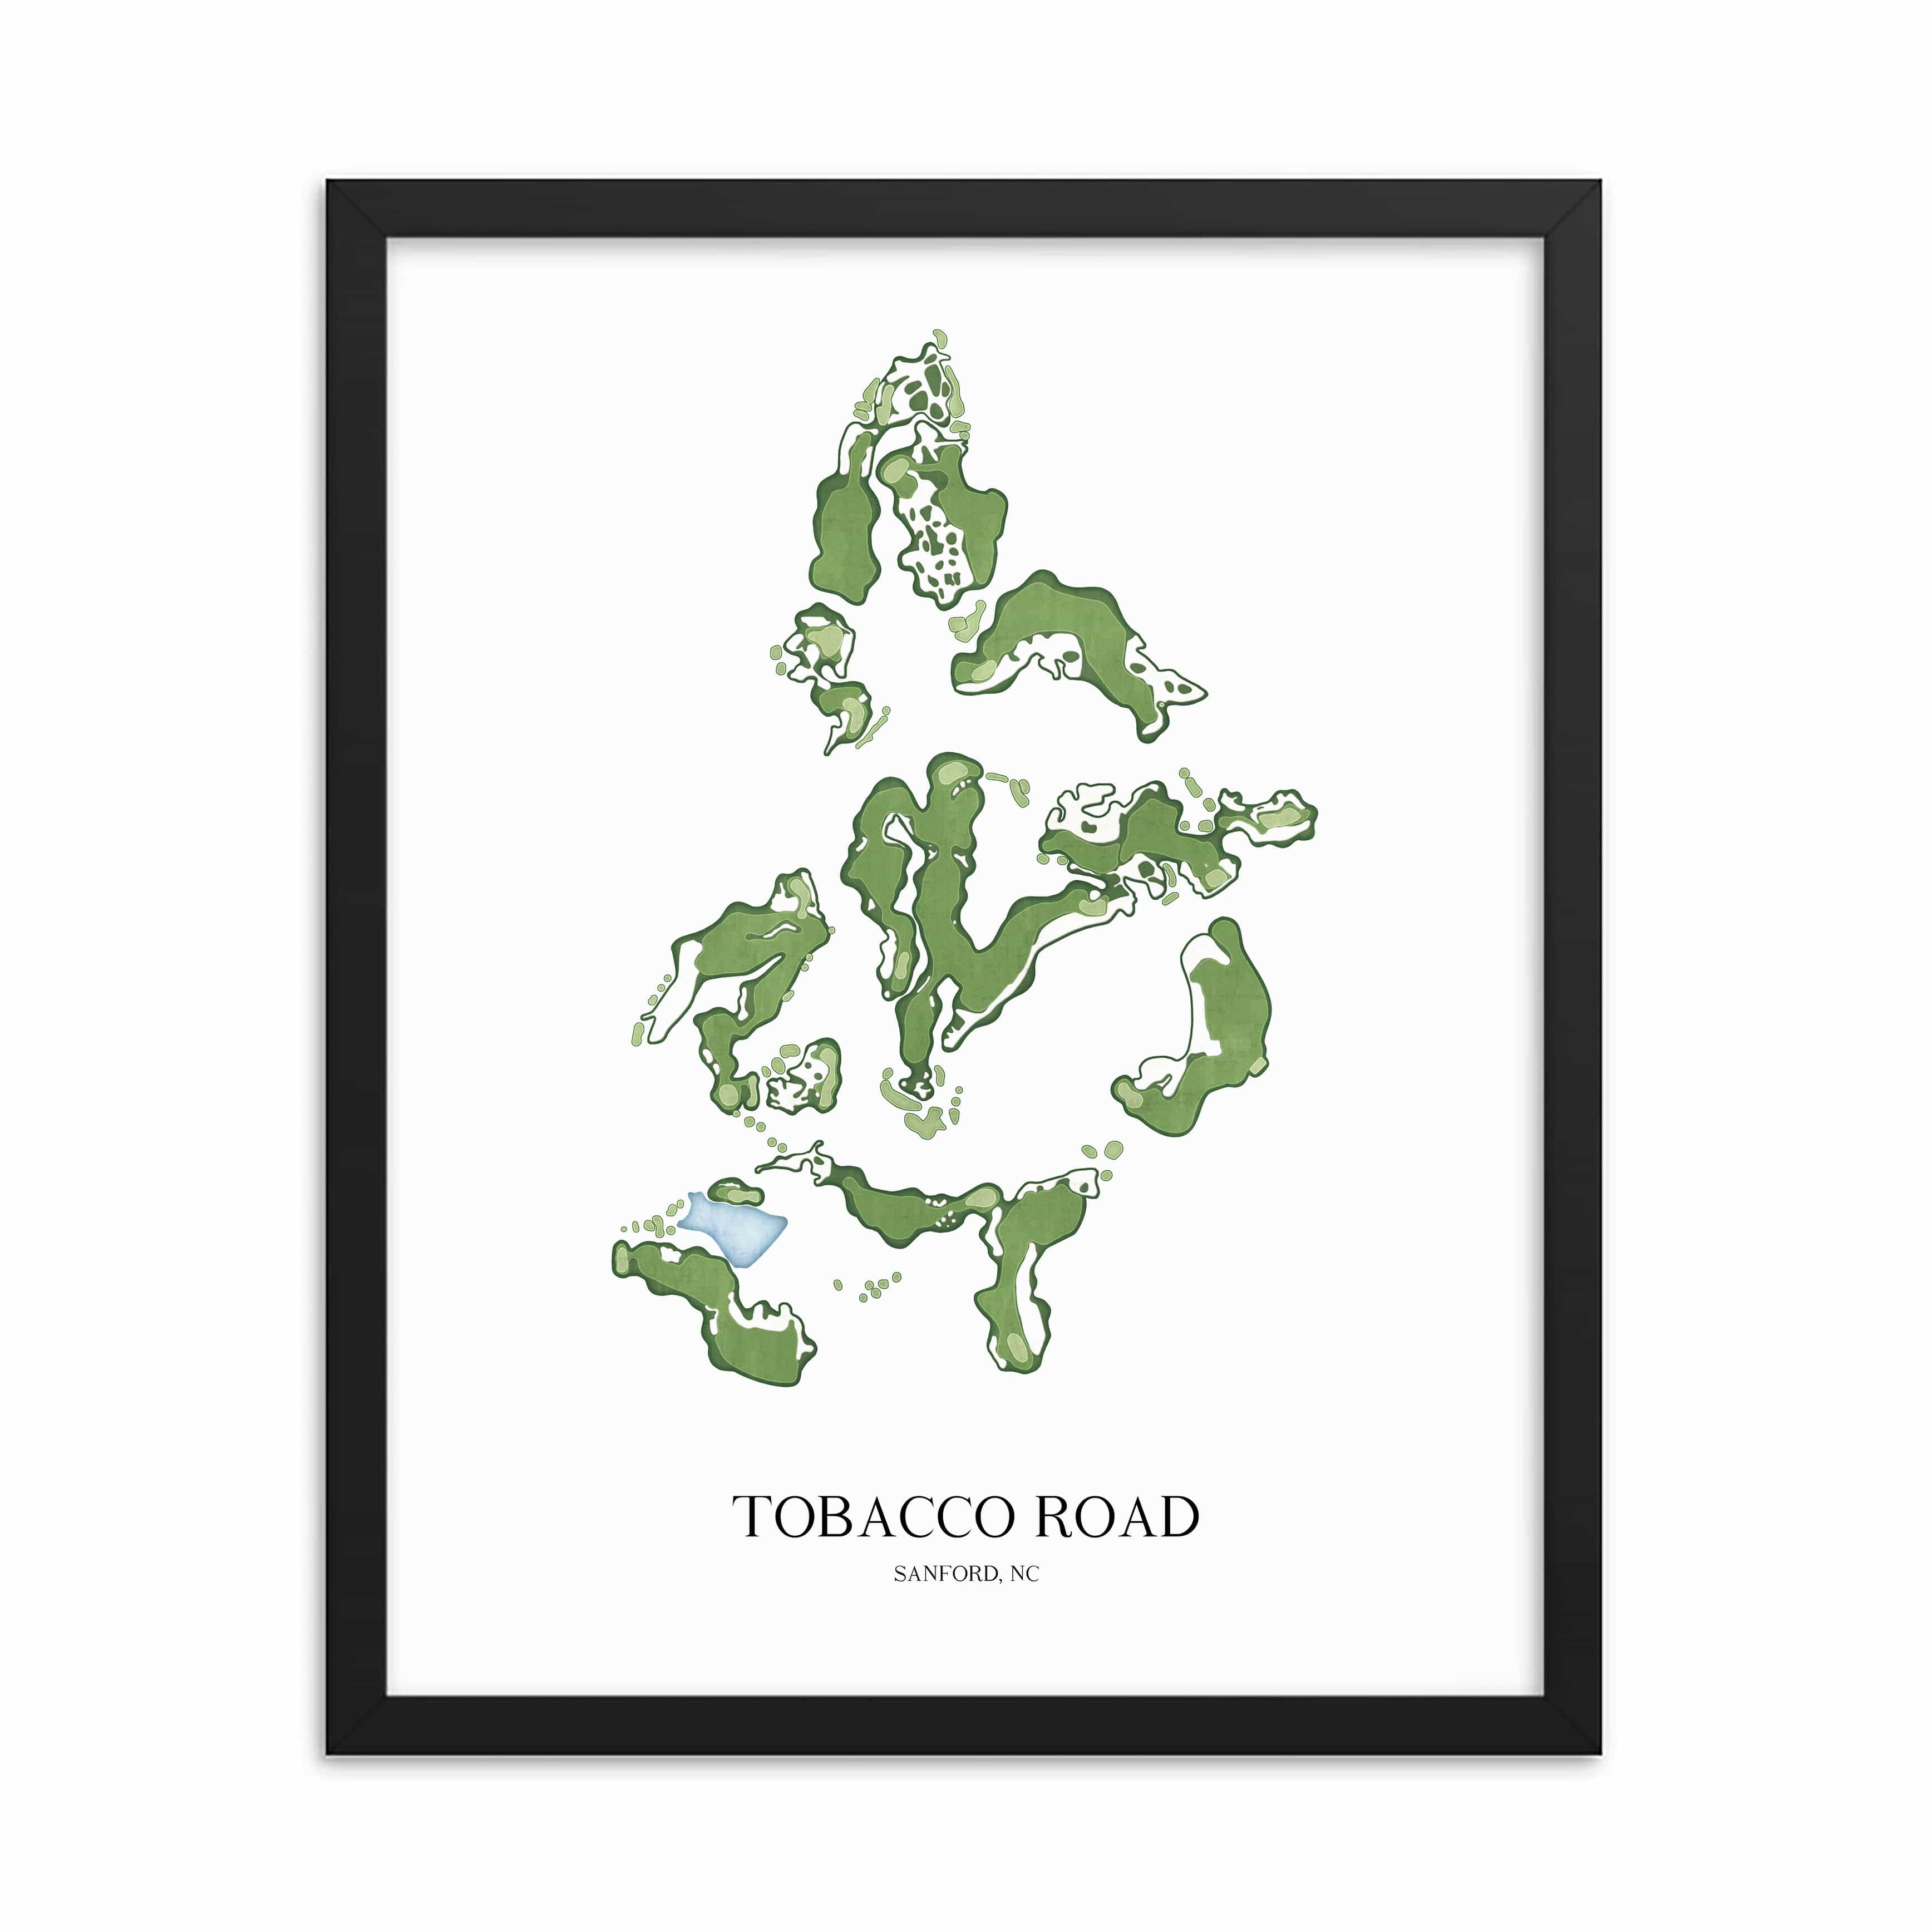 The 19th Hole Golf Shop - Golf Course Prints -  8" x 10" / Black Tobacco Road Golf Course Map